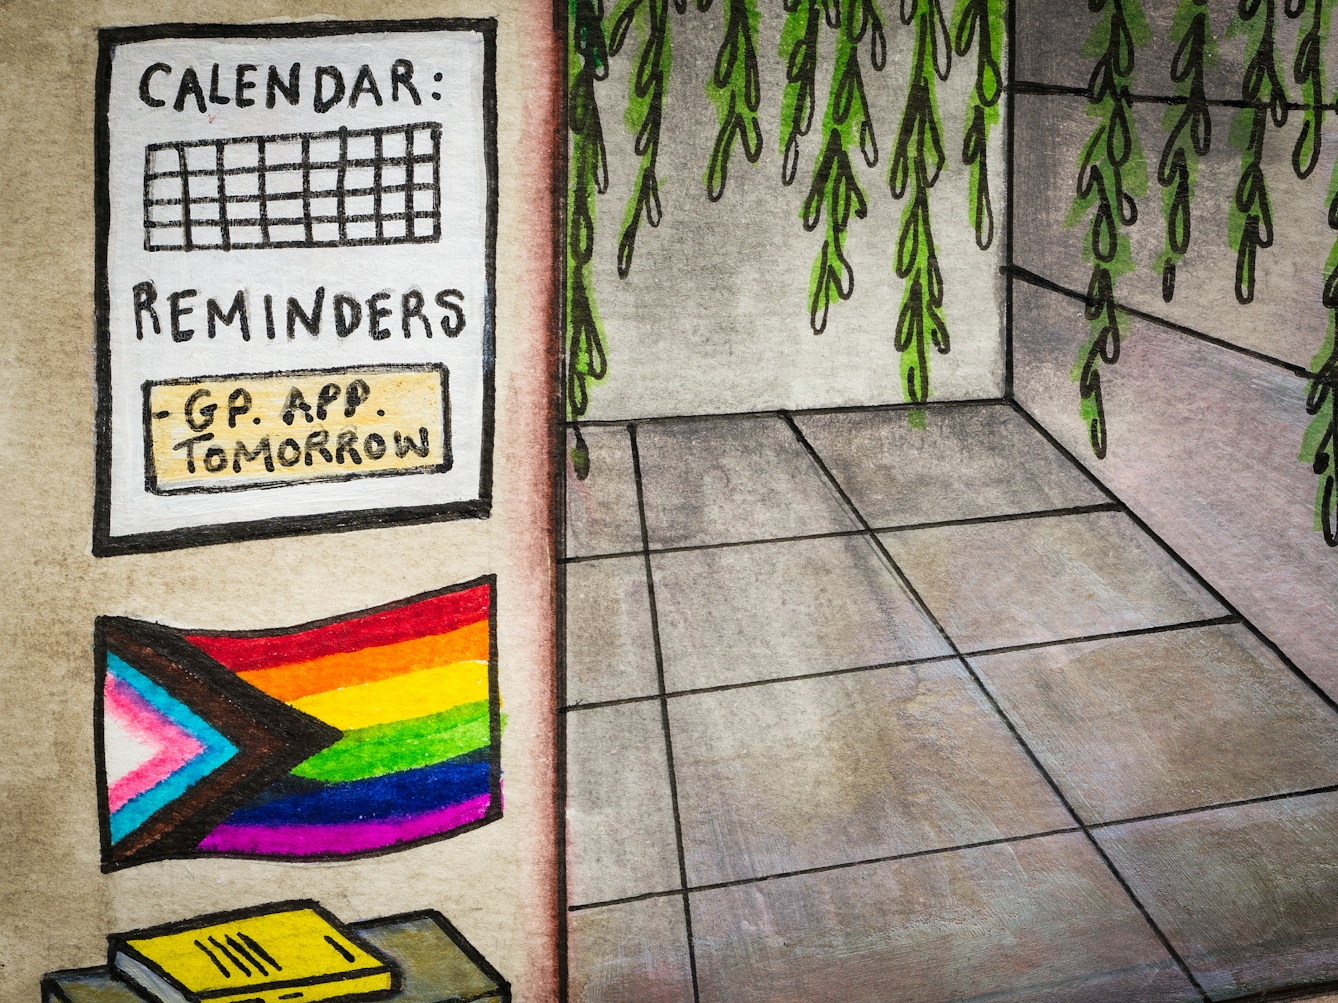 Detail from larger artwork made with paint and ink on textured watercolour paper. The artwork shows a scene in a bedroom. On the wall is a Progress Flag and a calendar reminder for a GP appointment tomorrow.